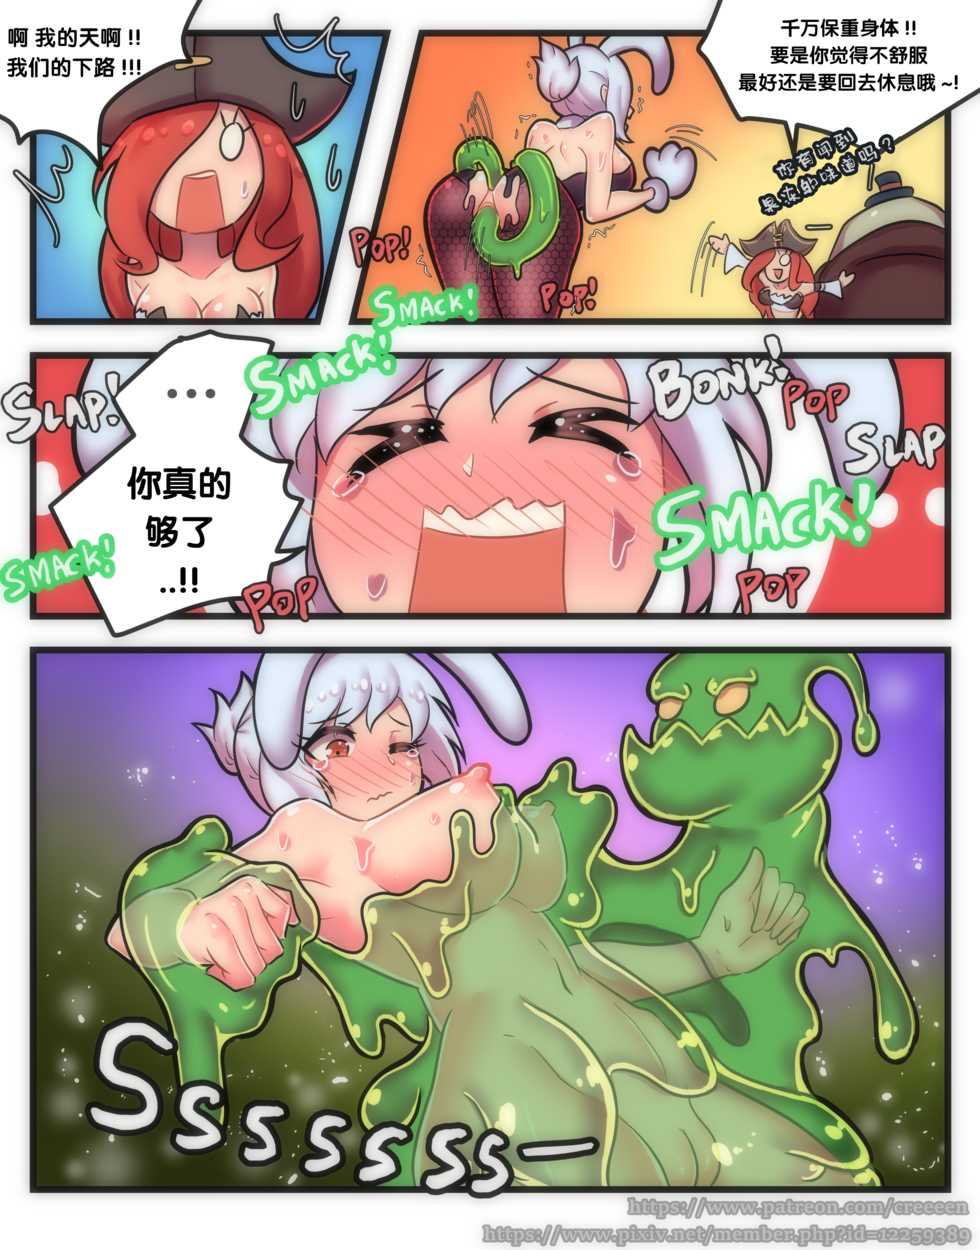 [Creeeen] Rabbit Jelly (League of Legends) [Chinese] [新桥月白日语社] - Page 14